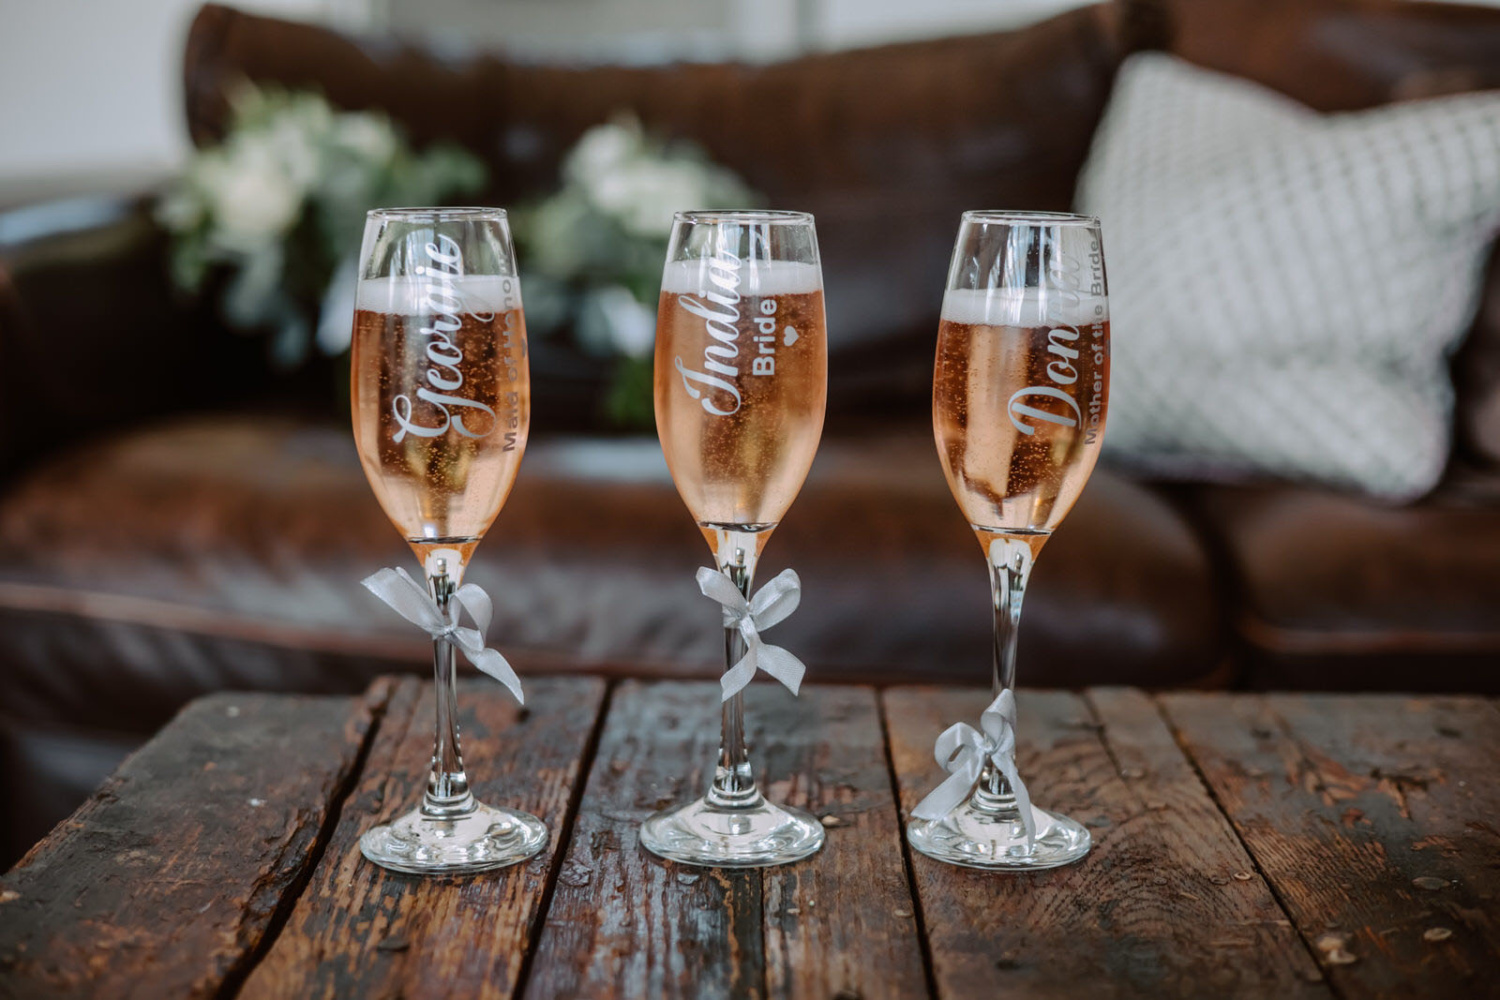 Three champagne flutes are sitting on a table next to a couch.